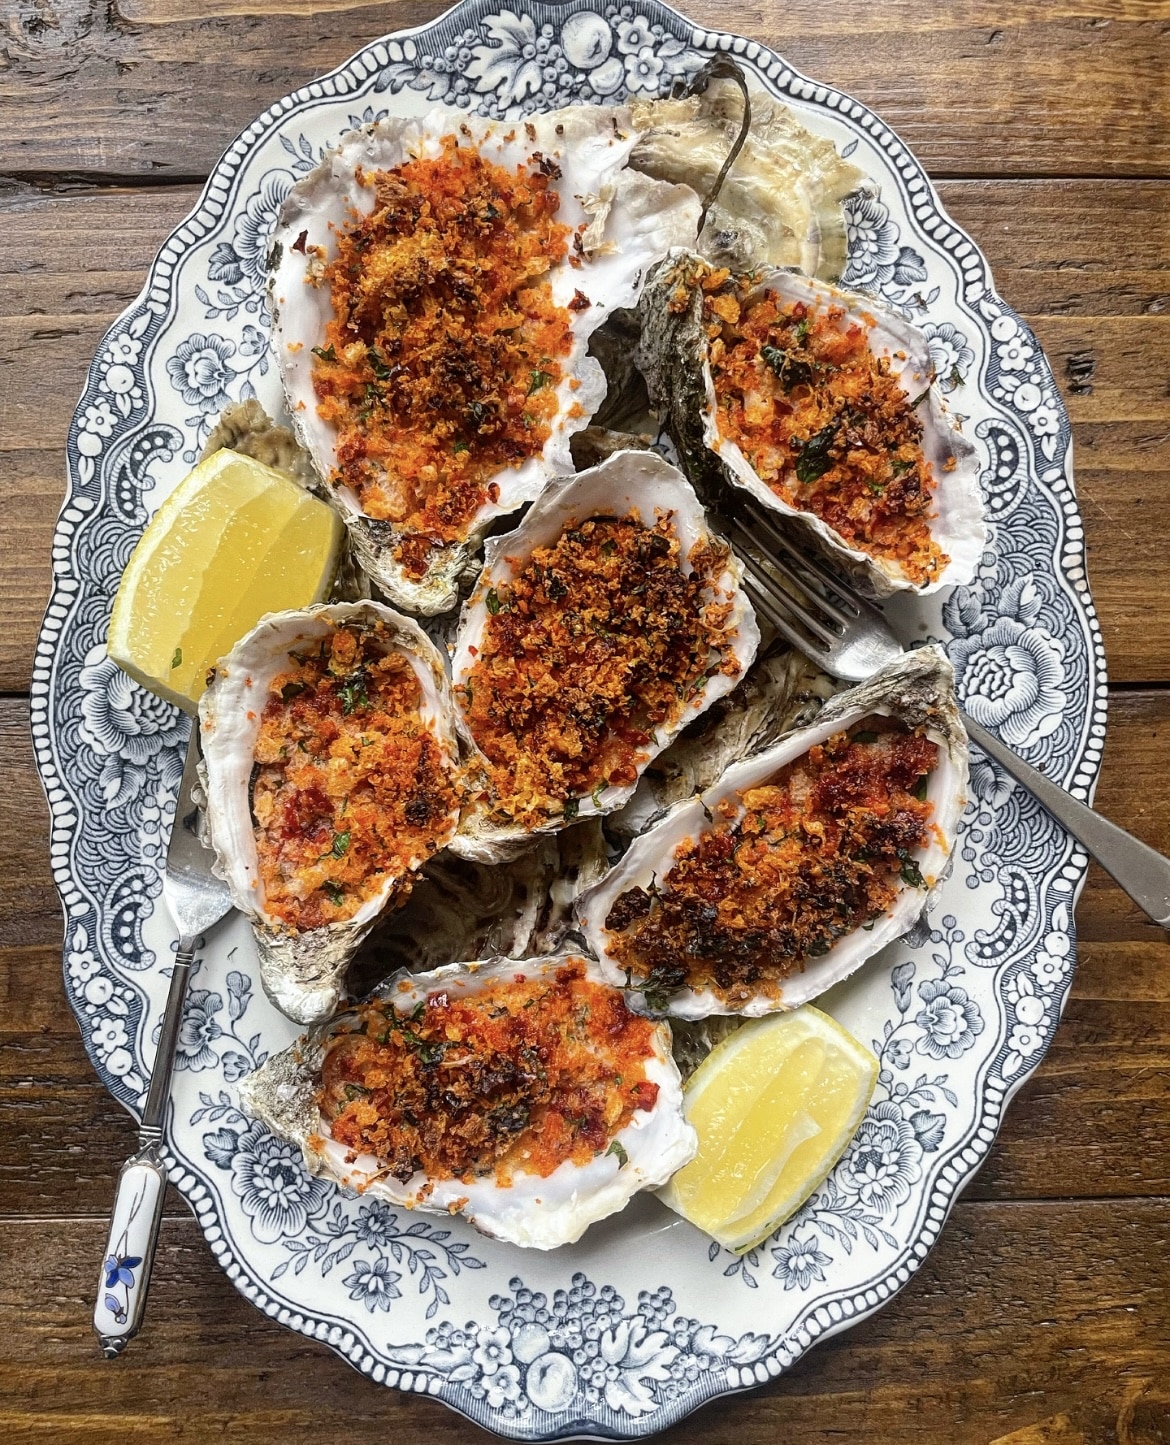 Grilled Oysters with an ‘Nduja, Parsley and Parmesan Crumb